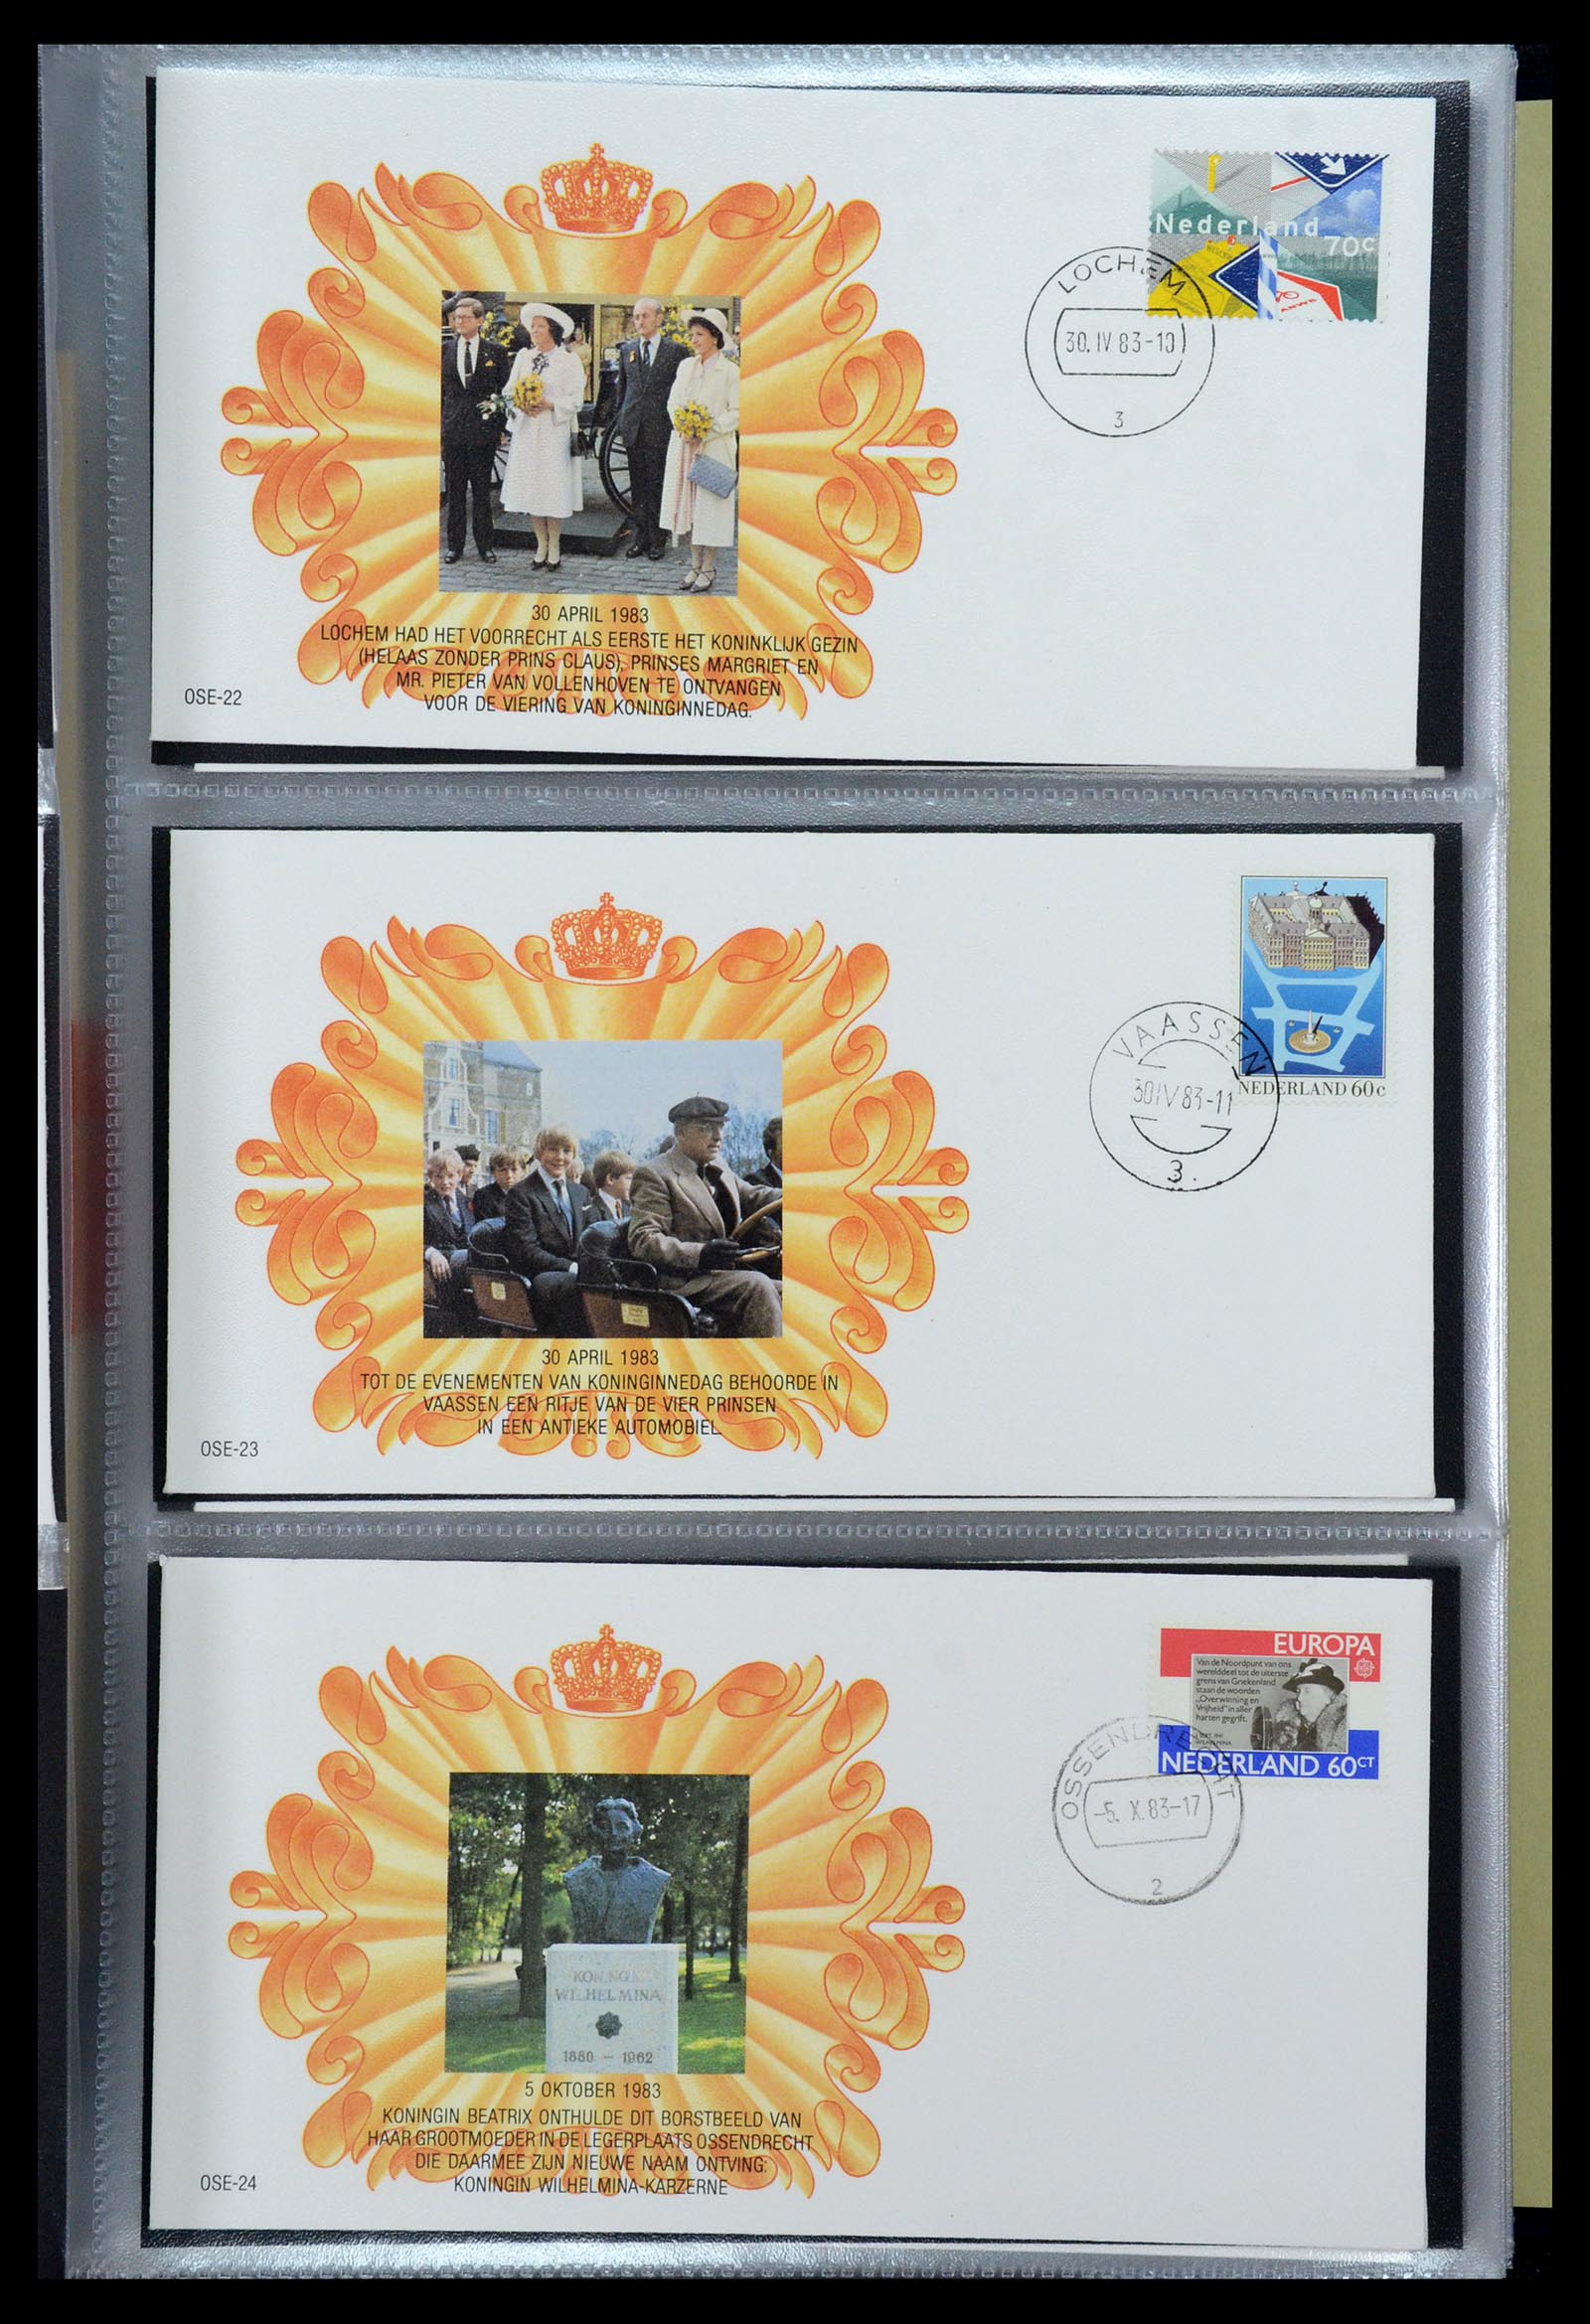 36322 009 - Stamp collection 36322 Netherlands Dutch Royal Family 1981-2013.